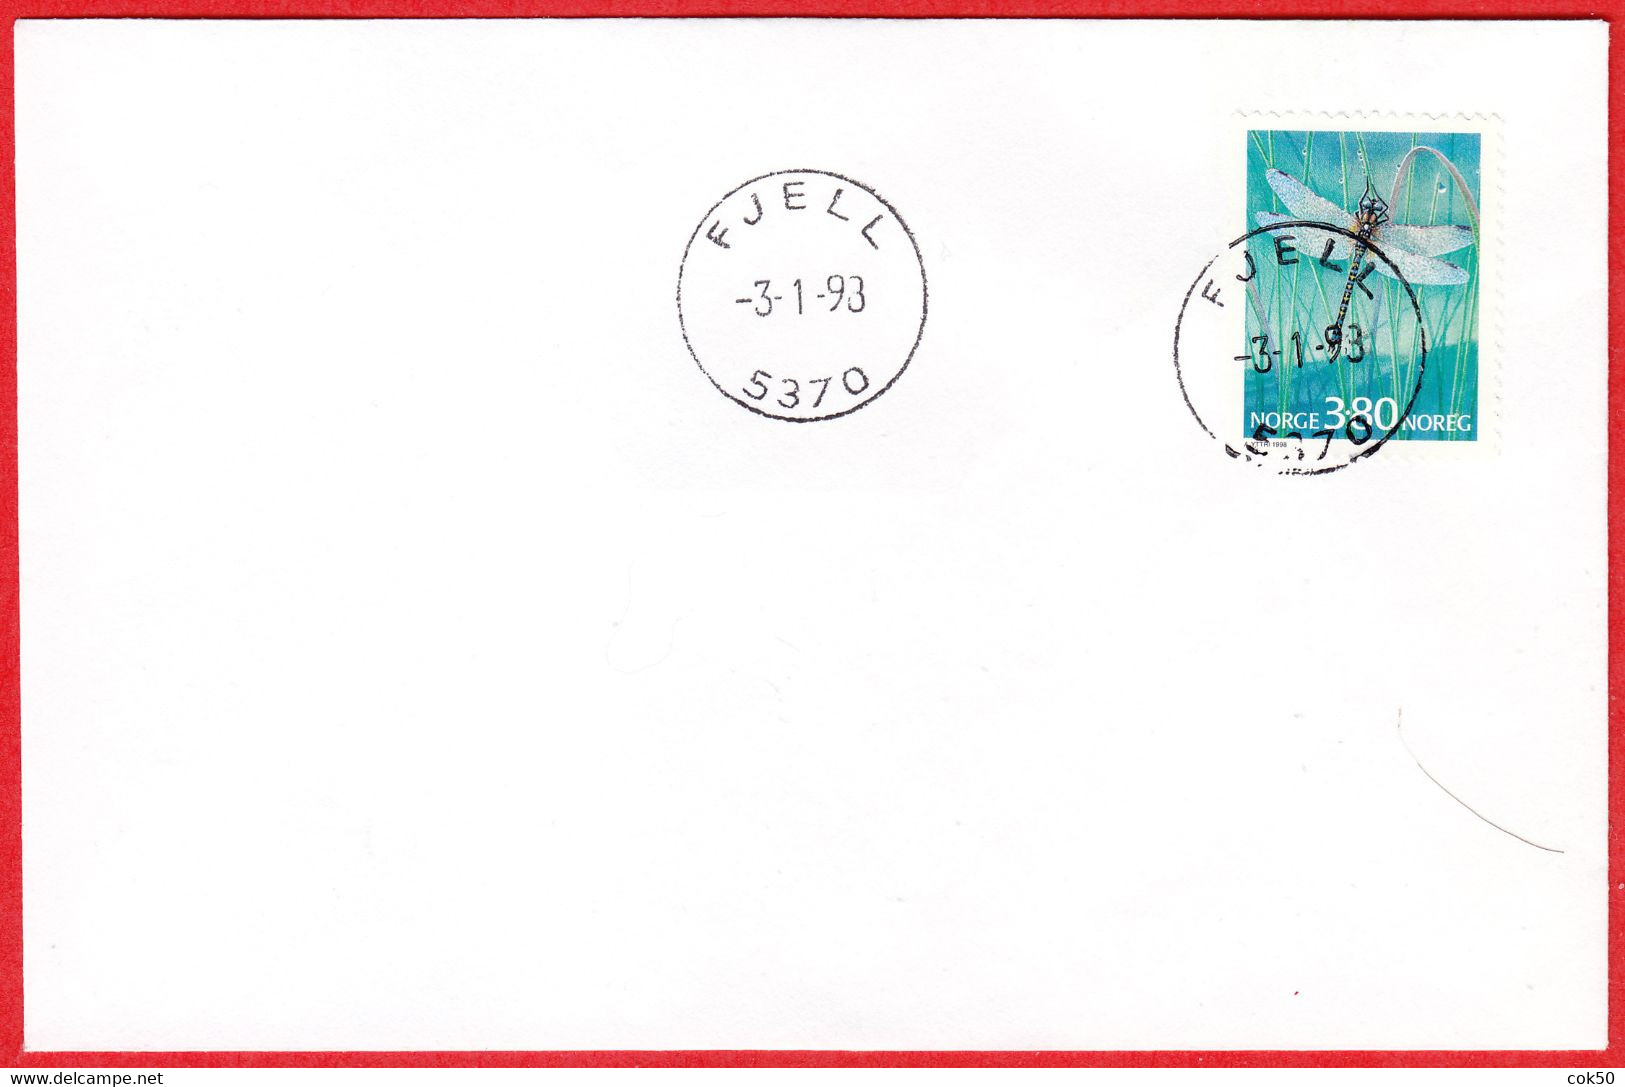 NORWAY - 5370 FJELL (Hordaland County) = Vestland From Jan.1 2020 - Last Day/postoffice Closed On 1998.01.03 - Emissioni Locali